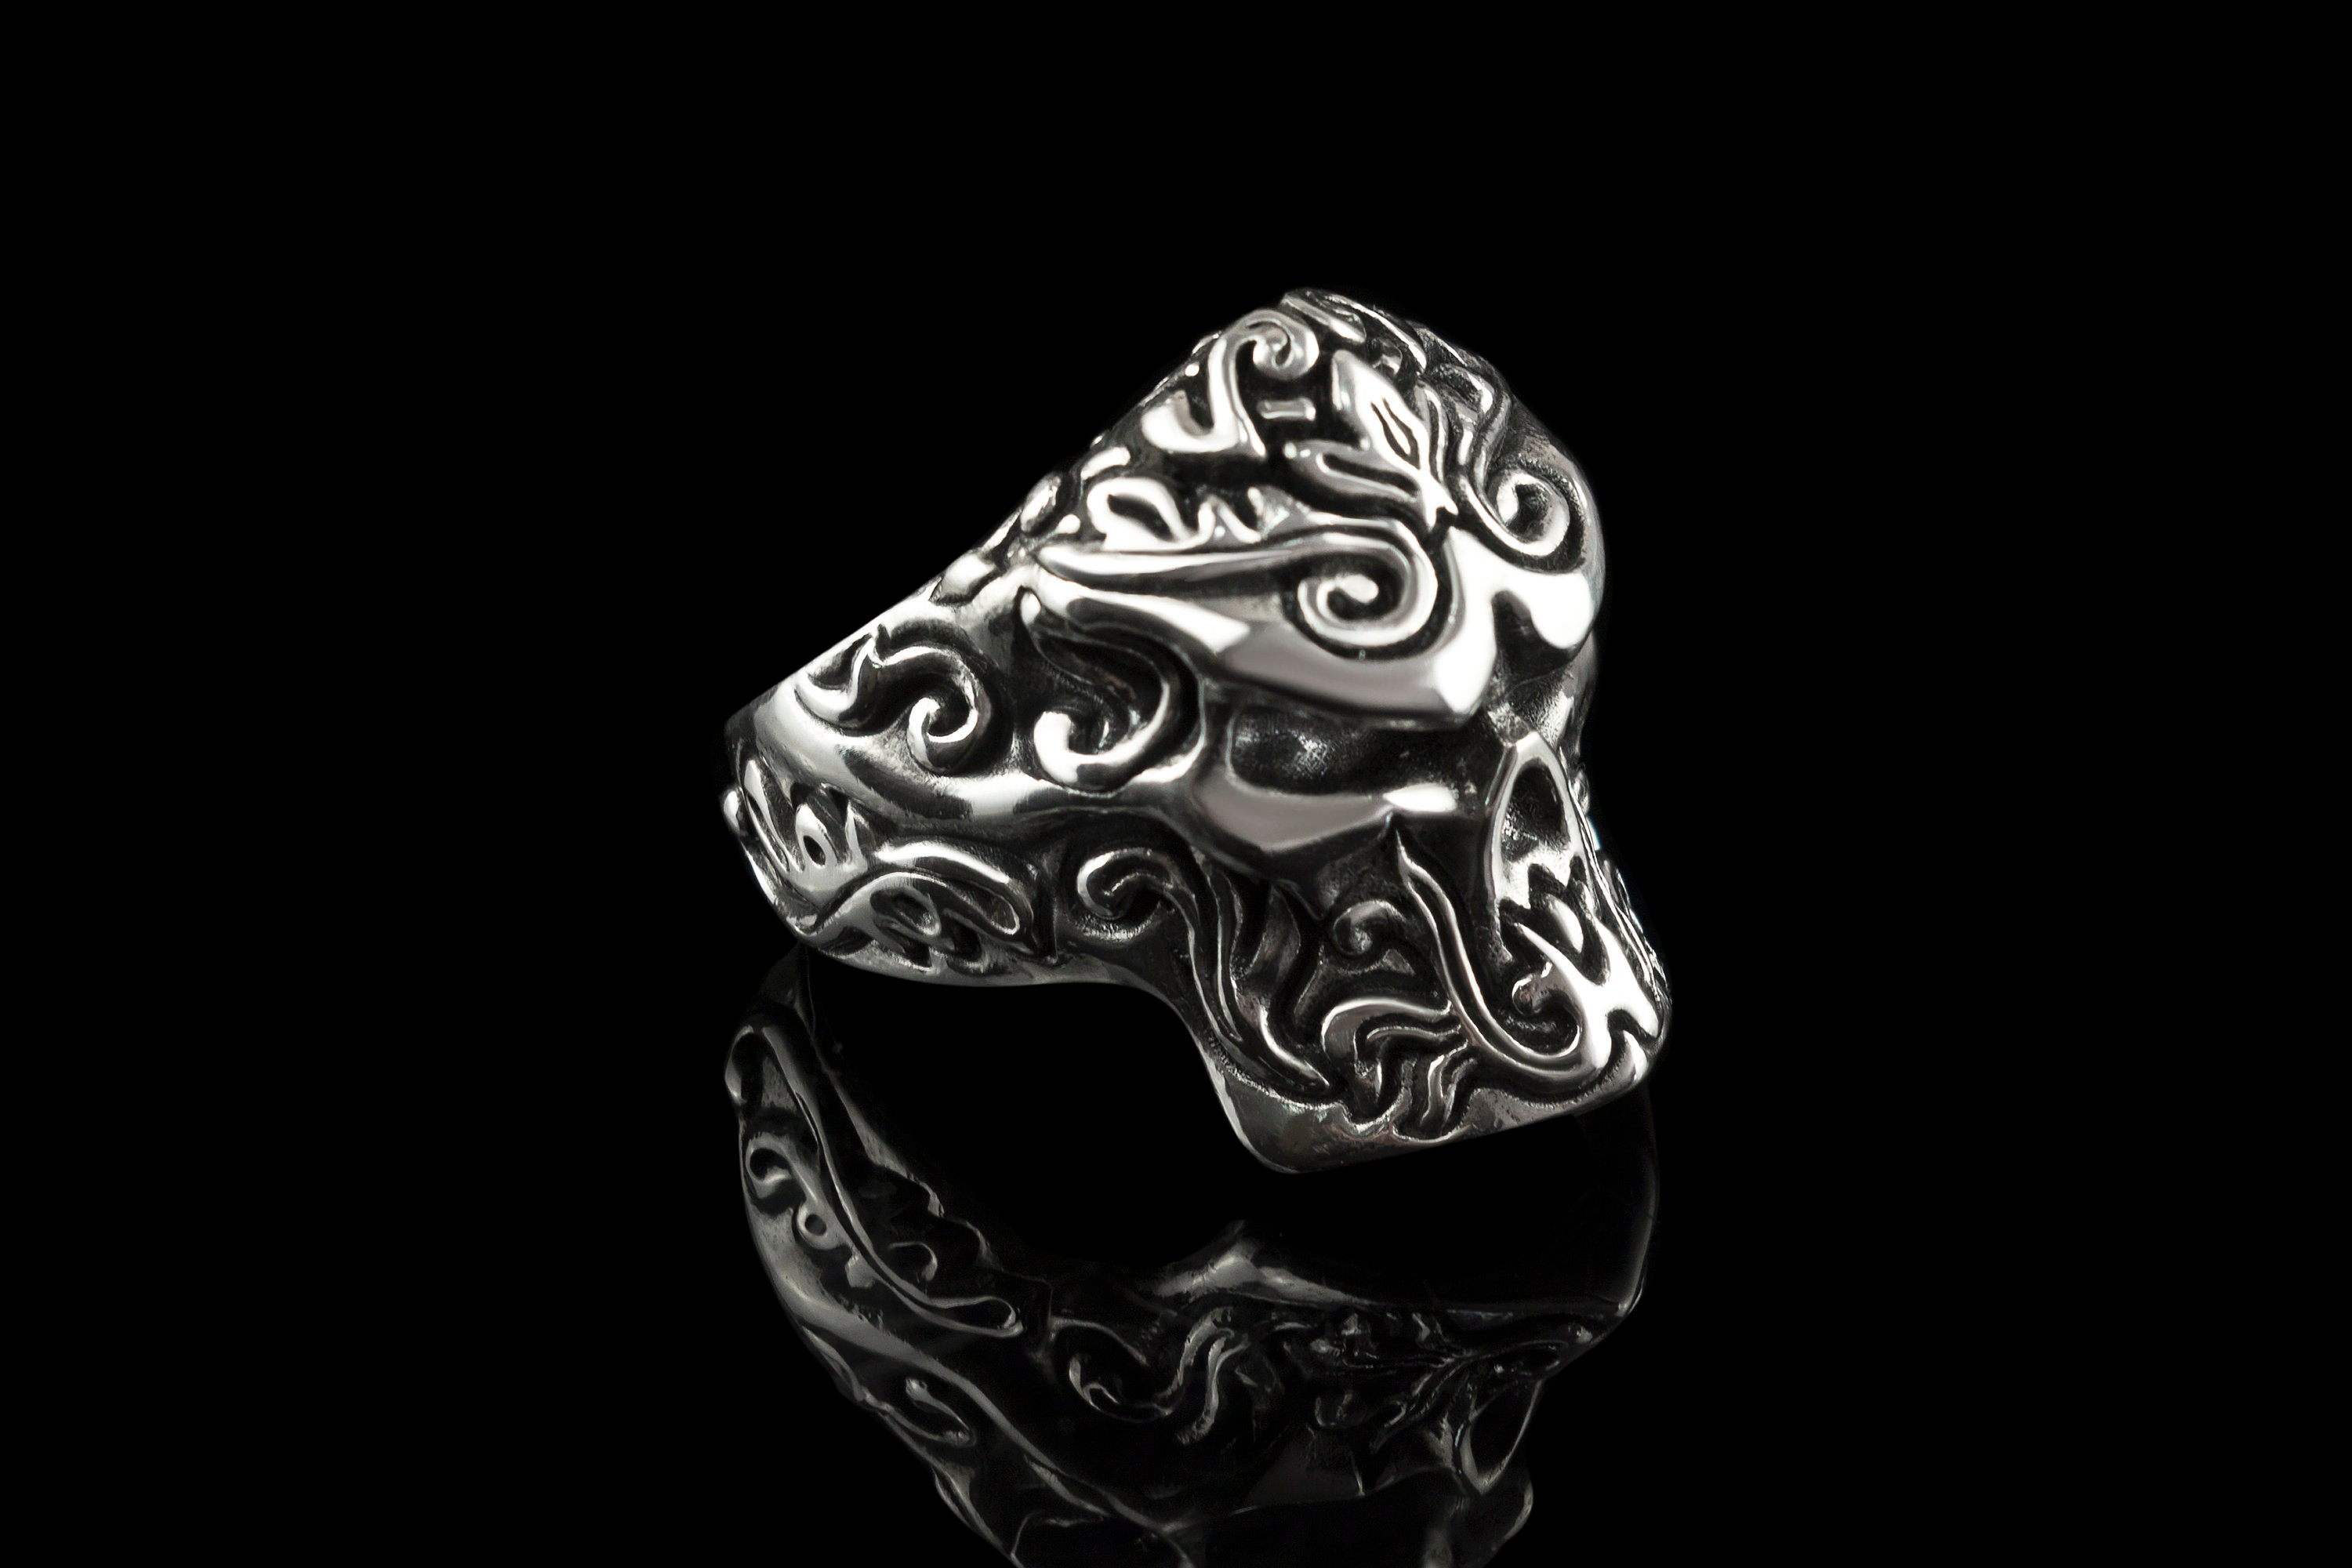 Mexican Skull Ring Skull Jewelry Earl Heavy Ring Brutal Style - Etsy